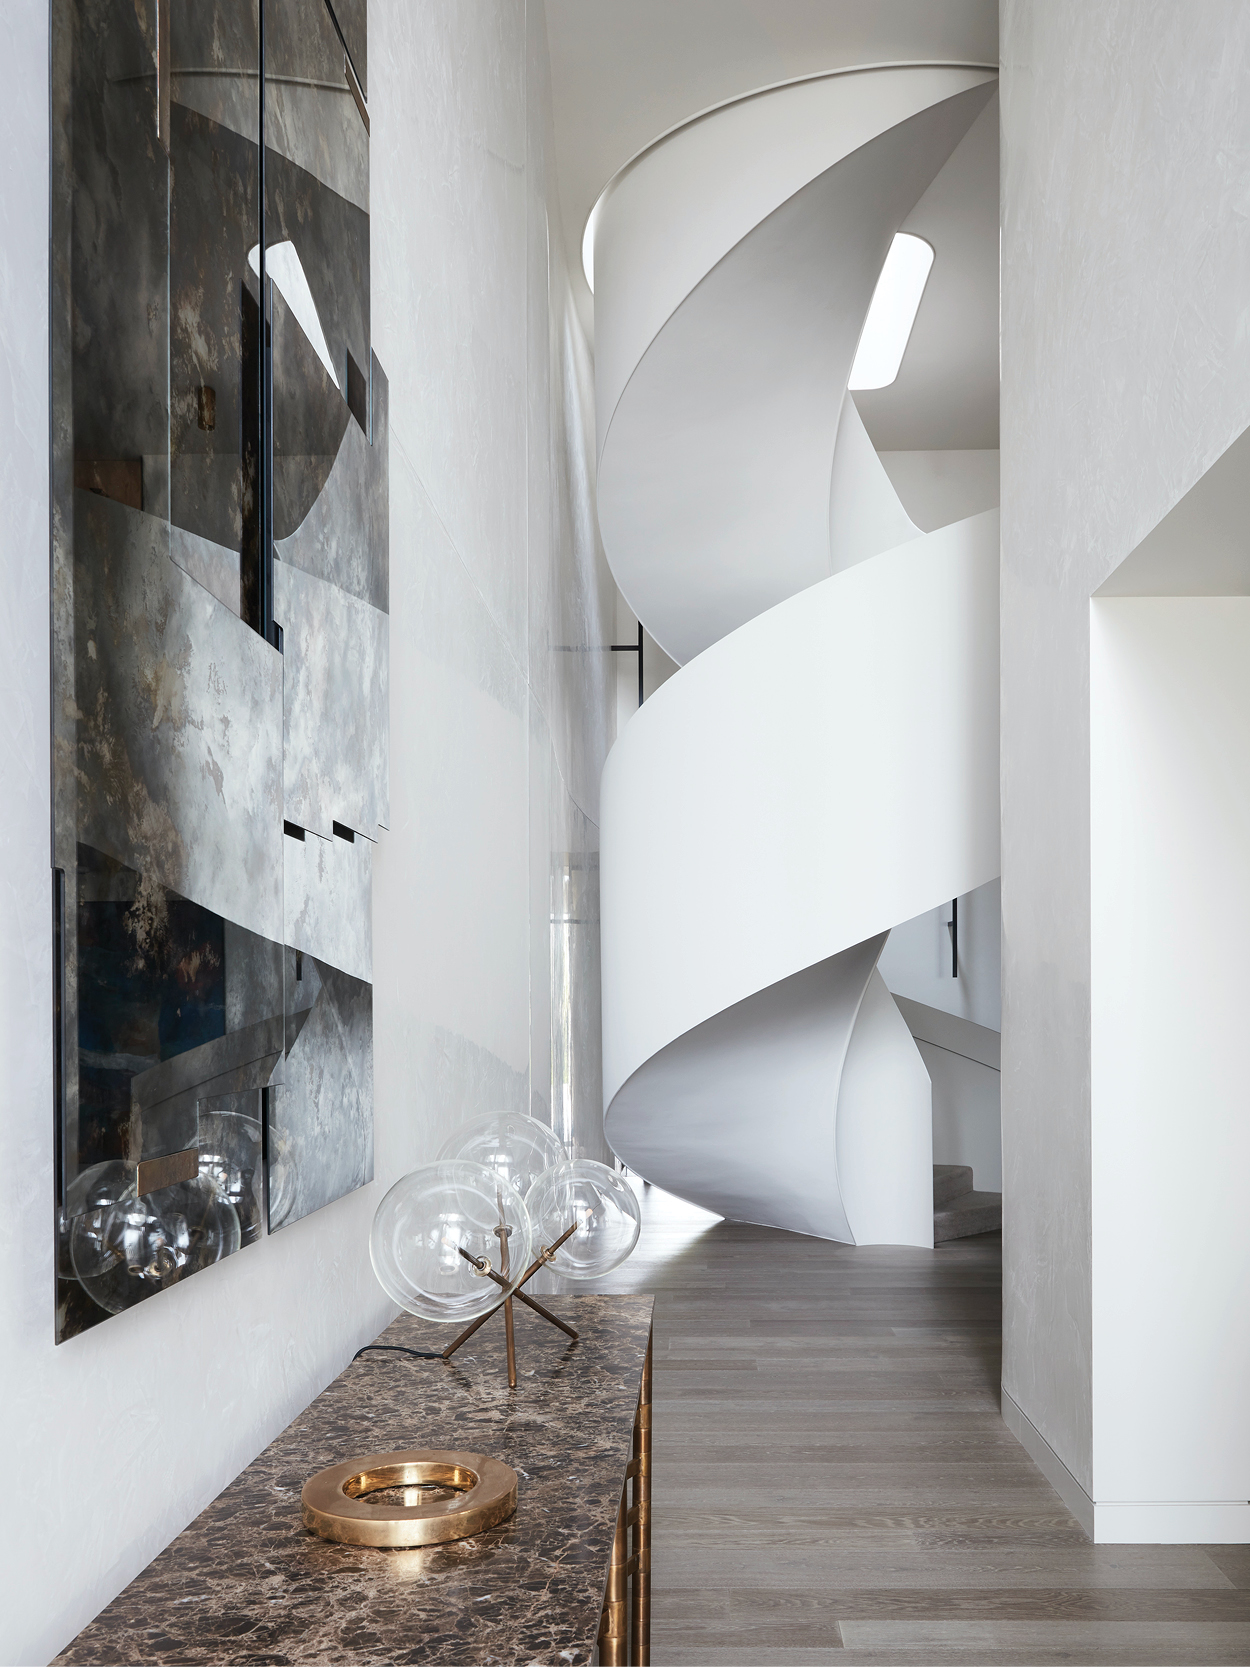 This light-filled home plays with bold curvature to create refined ...